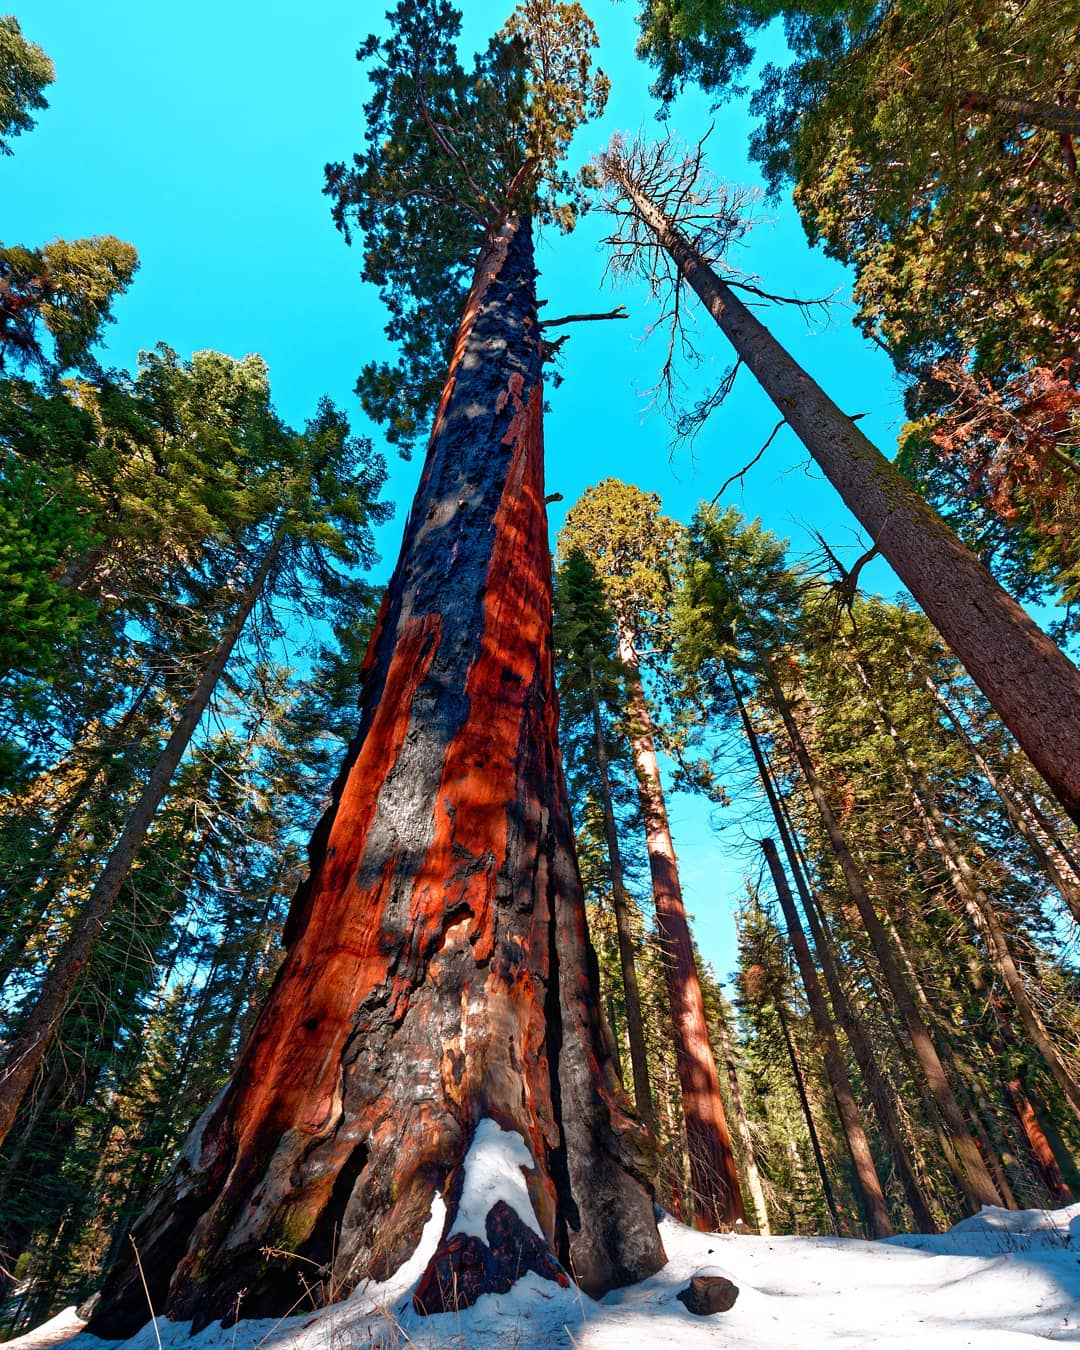 Top 7 National Parks in the USA - Sequoia National Park